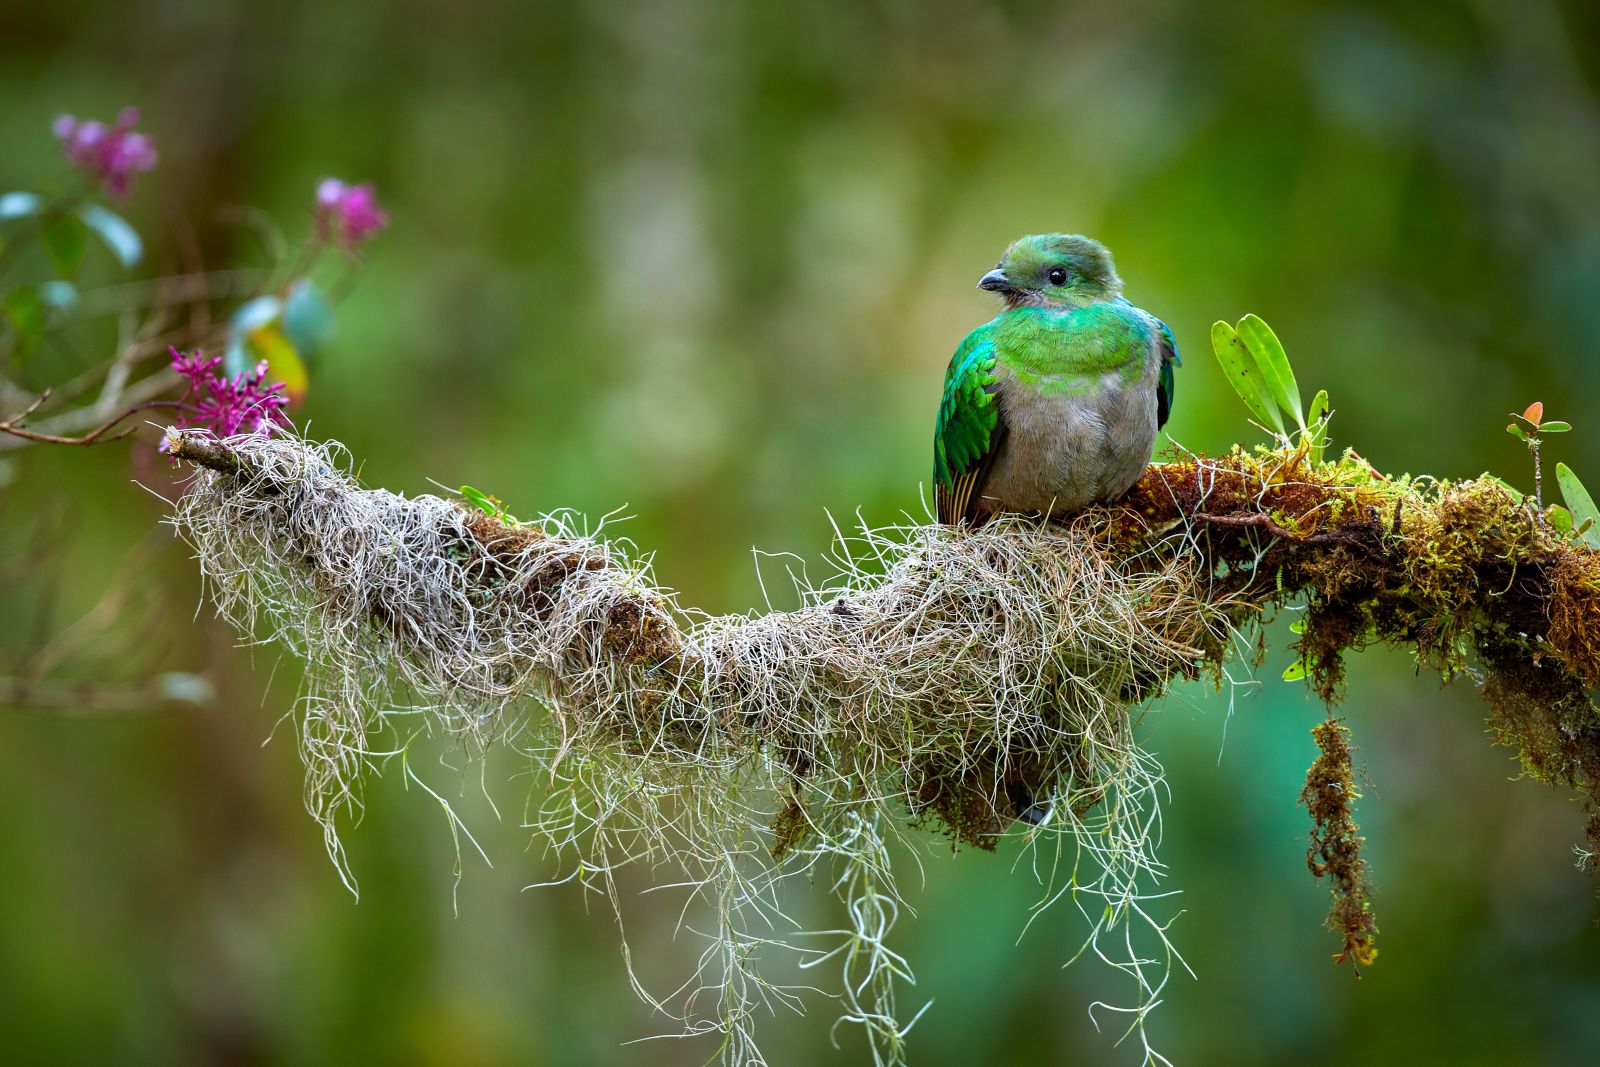 Resplendent Quetzal on a branch in the Costa Rican cloud forest